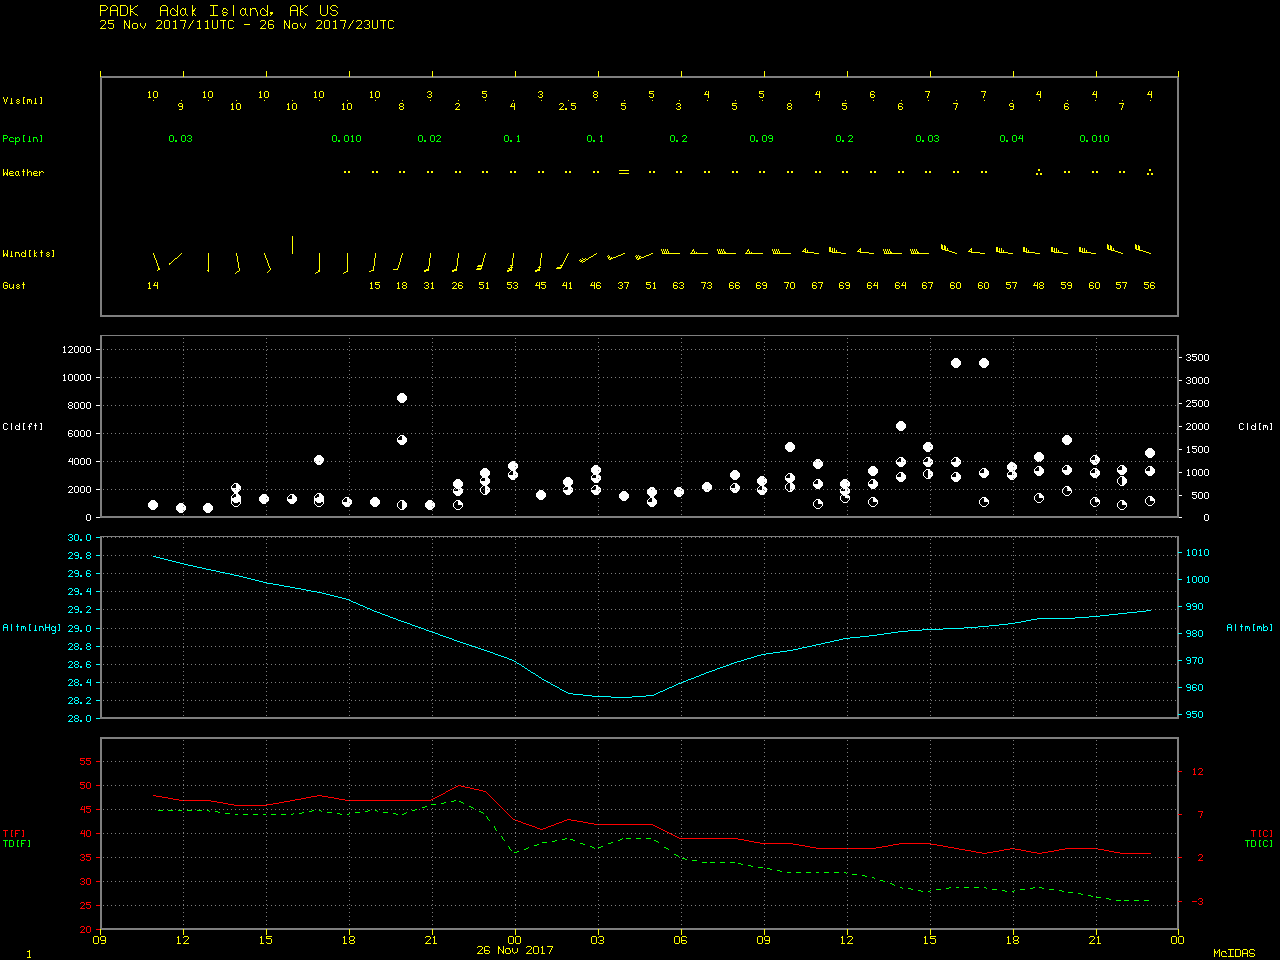 Time series of surface observations for Adak, Alaska [click to enlarge]